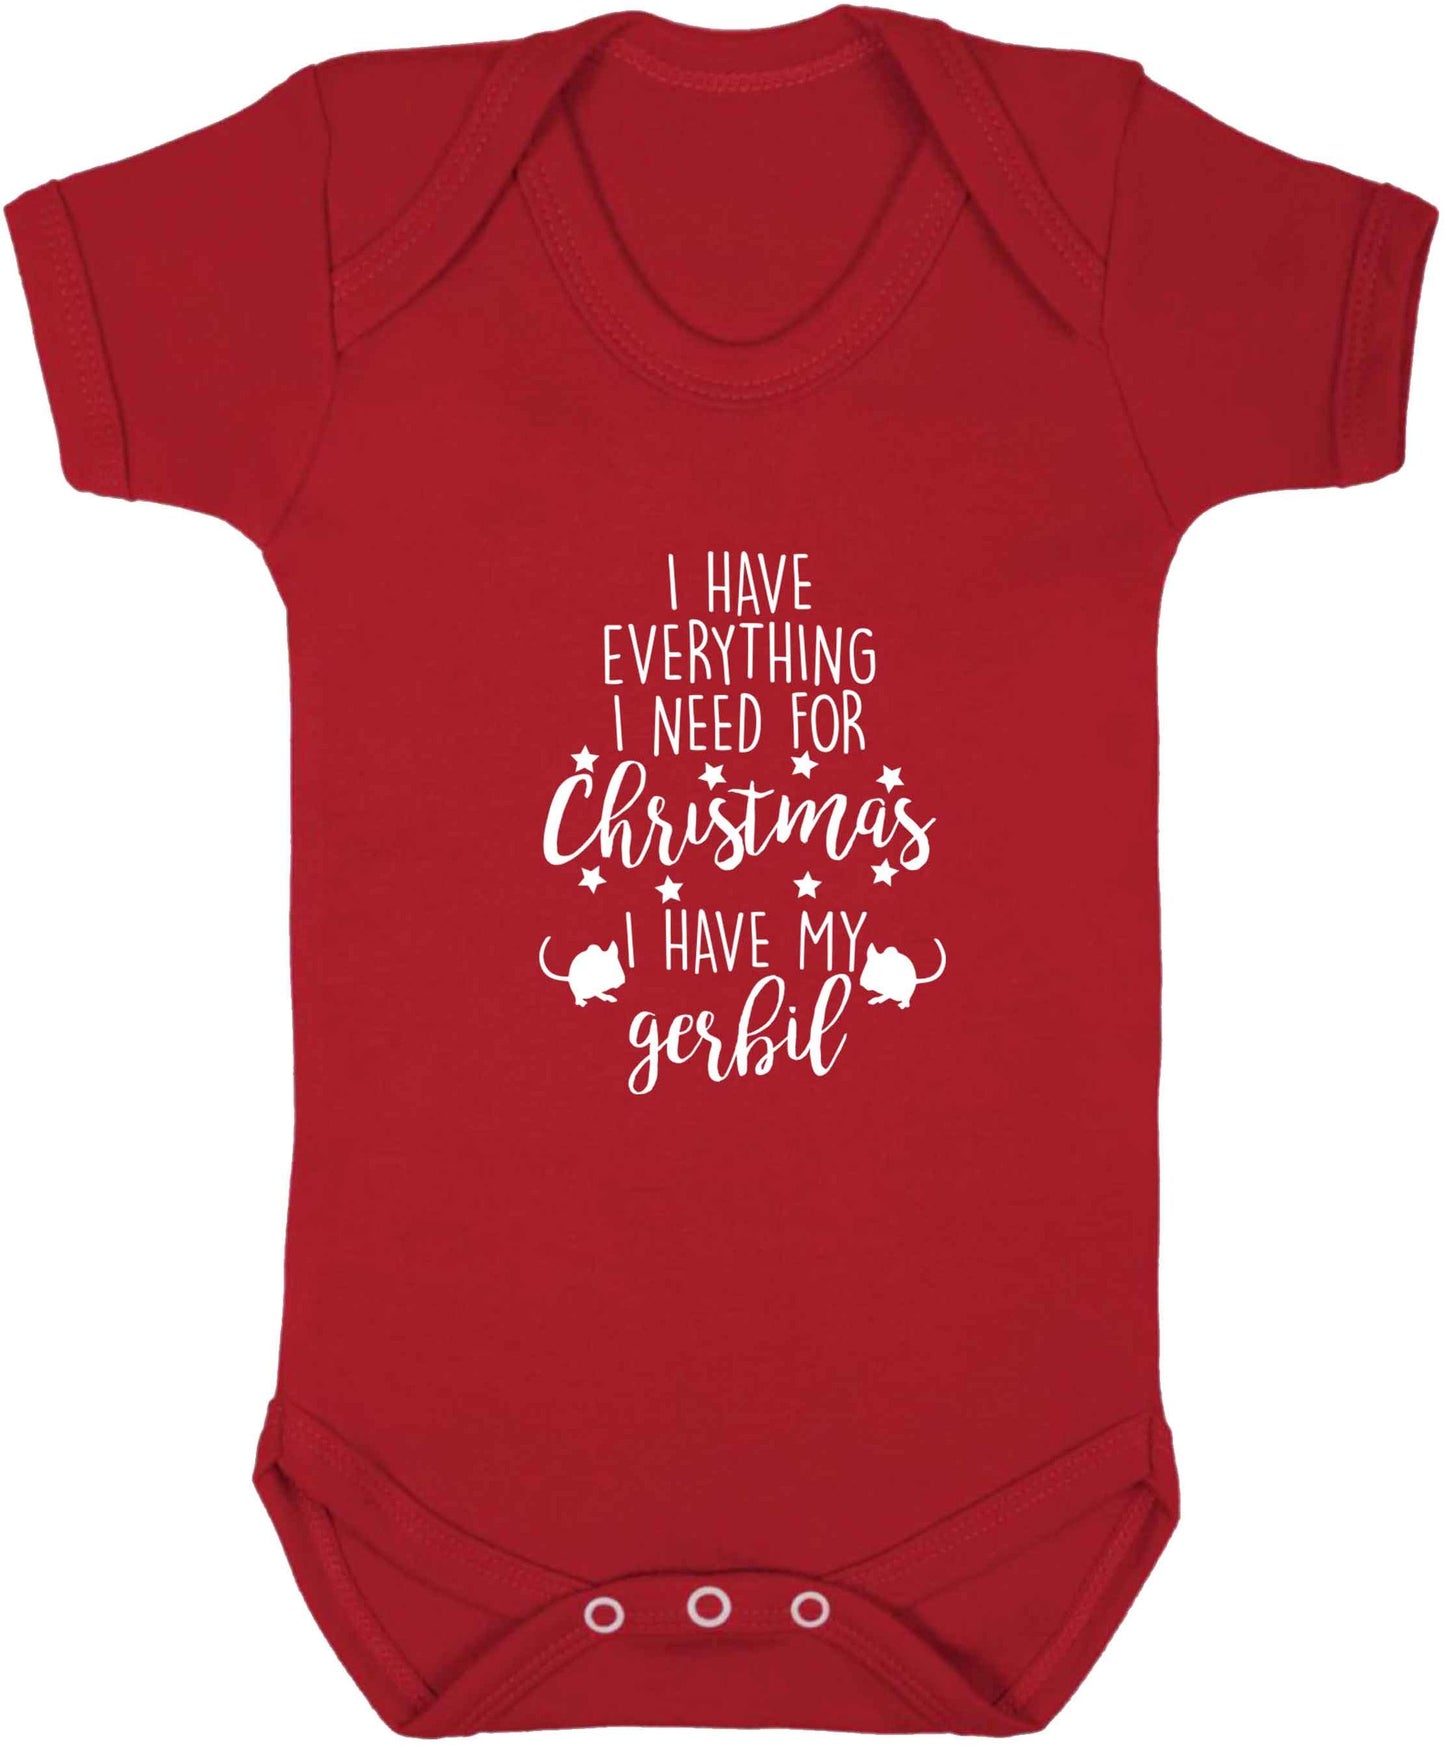 I have everything I need for Christmas I have my gerbil baby vest red 18-24 months